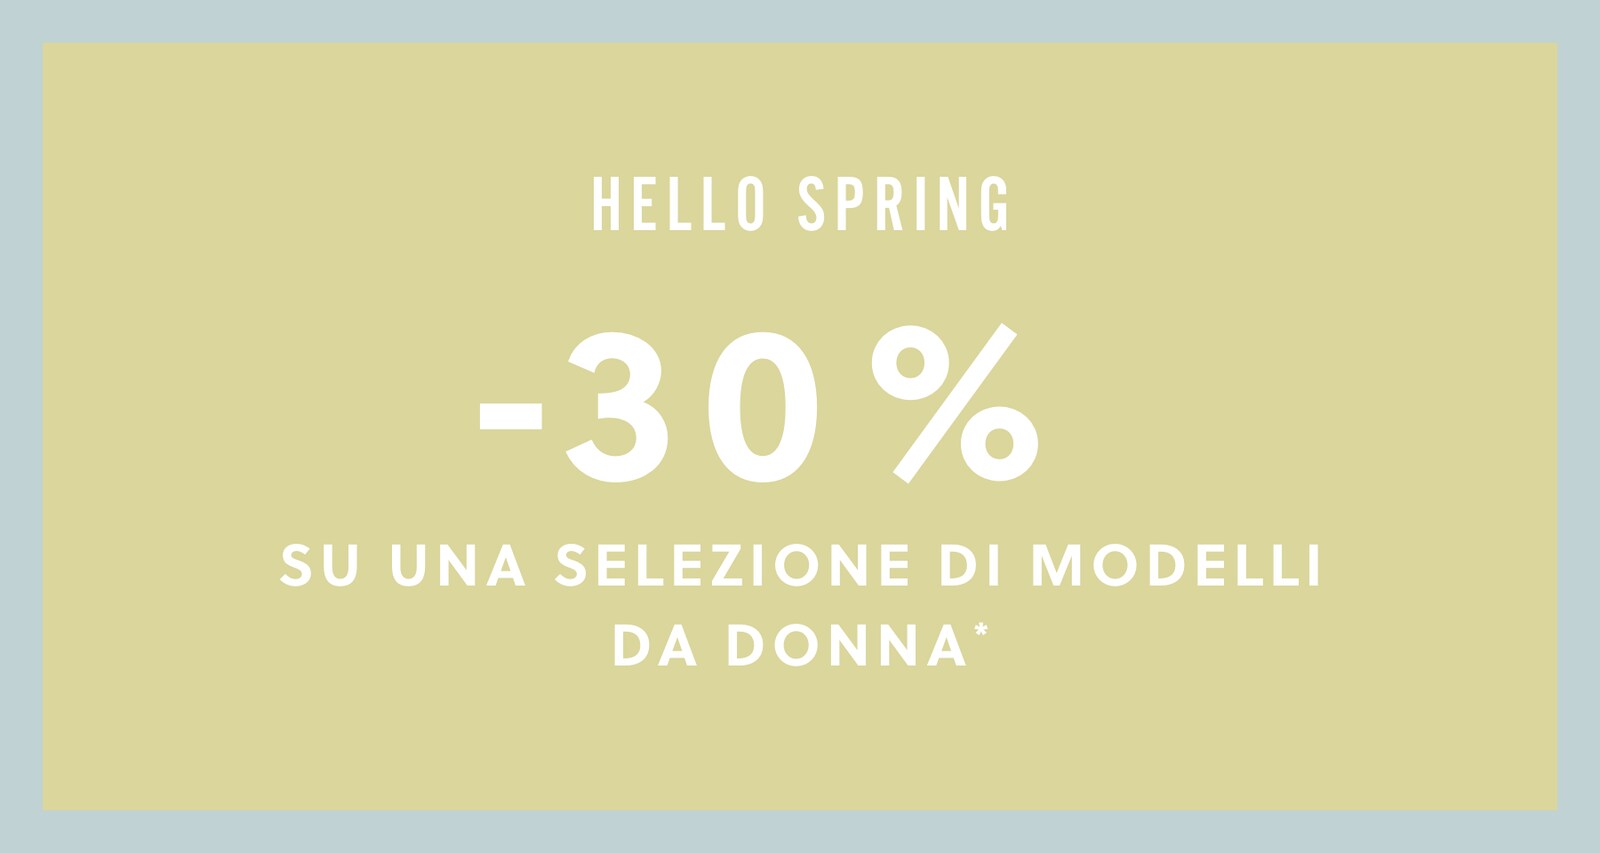 HELLO SPRING. 30% OFF SELECTED WOMEN'S STYLES*